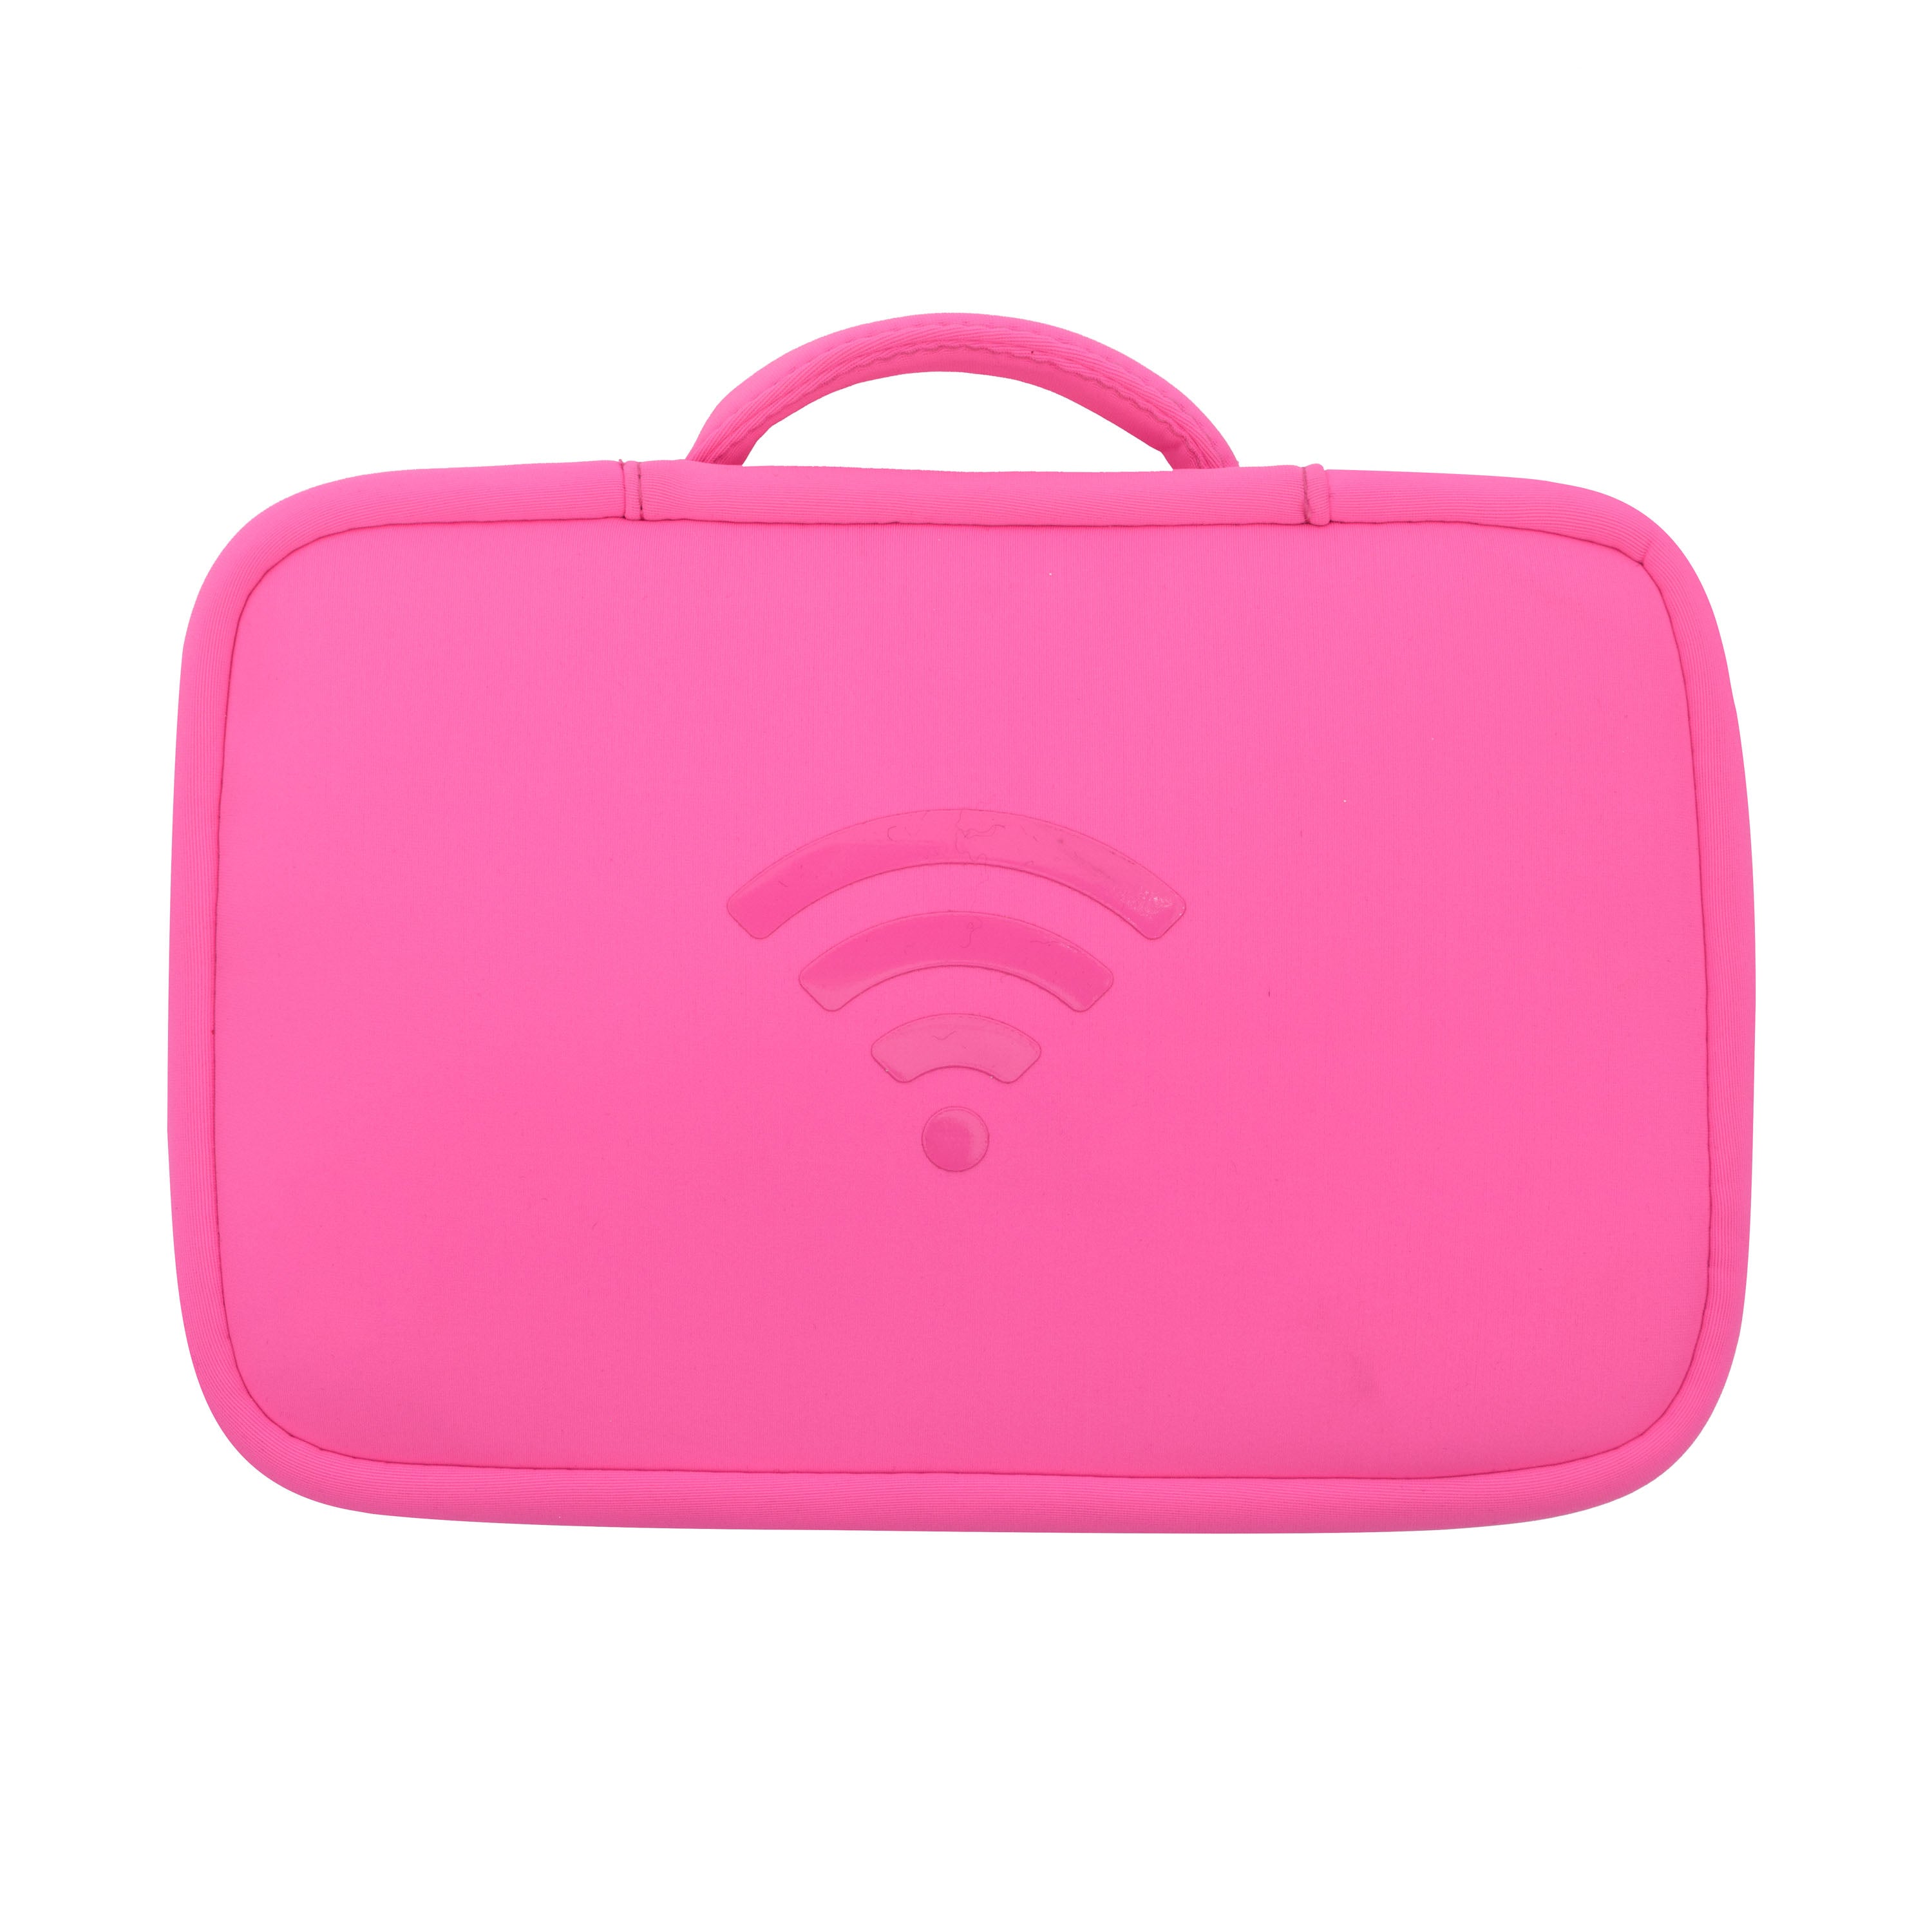 Hot pink neoprene cord and charger case